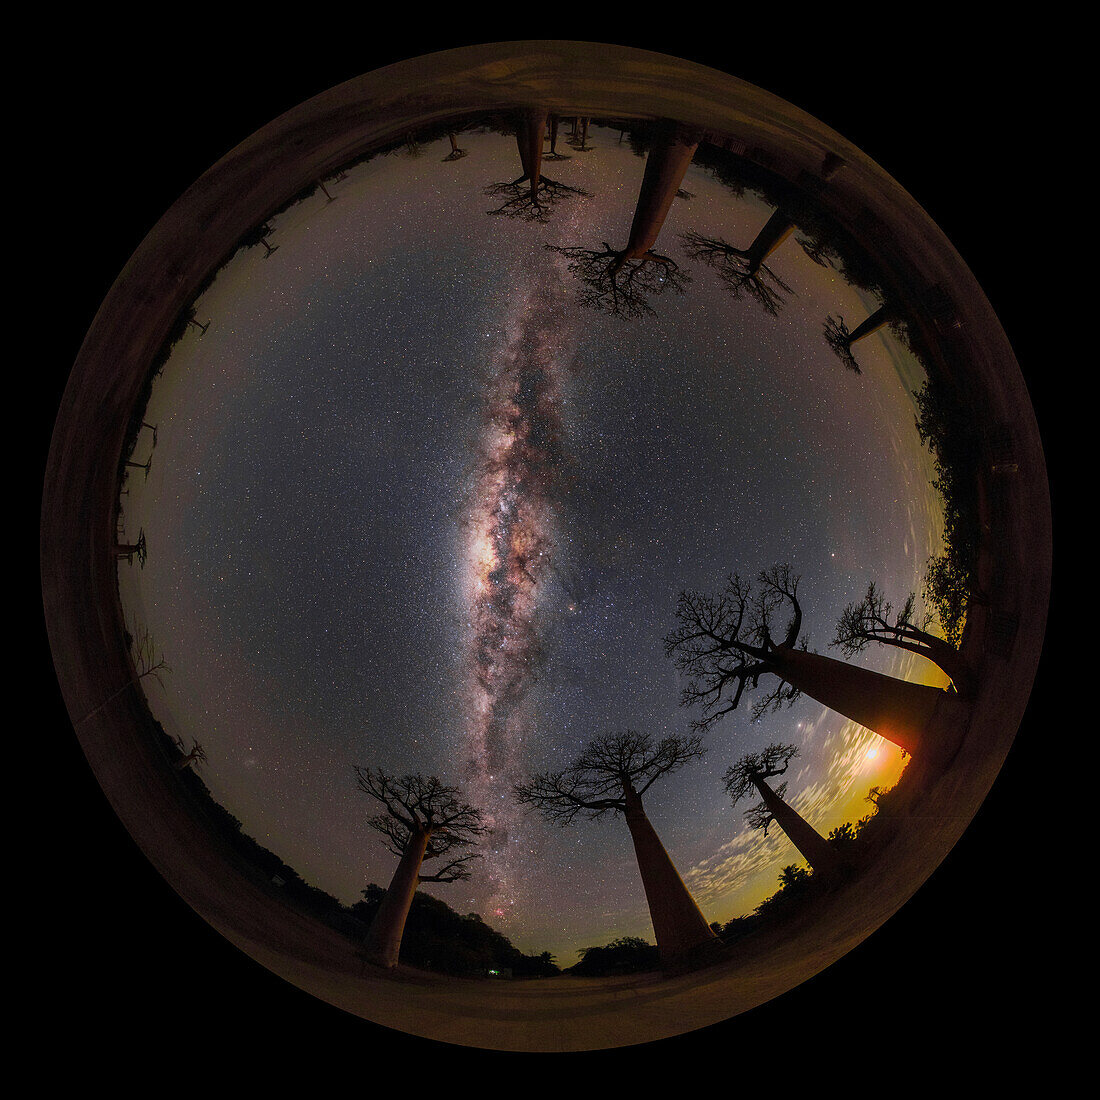 Night sky over baobab trees, 360-degree view